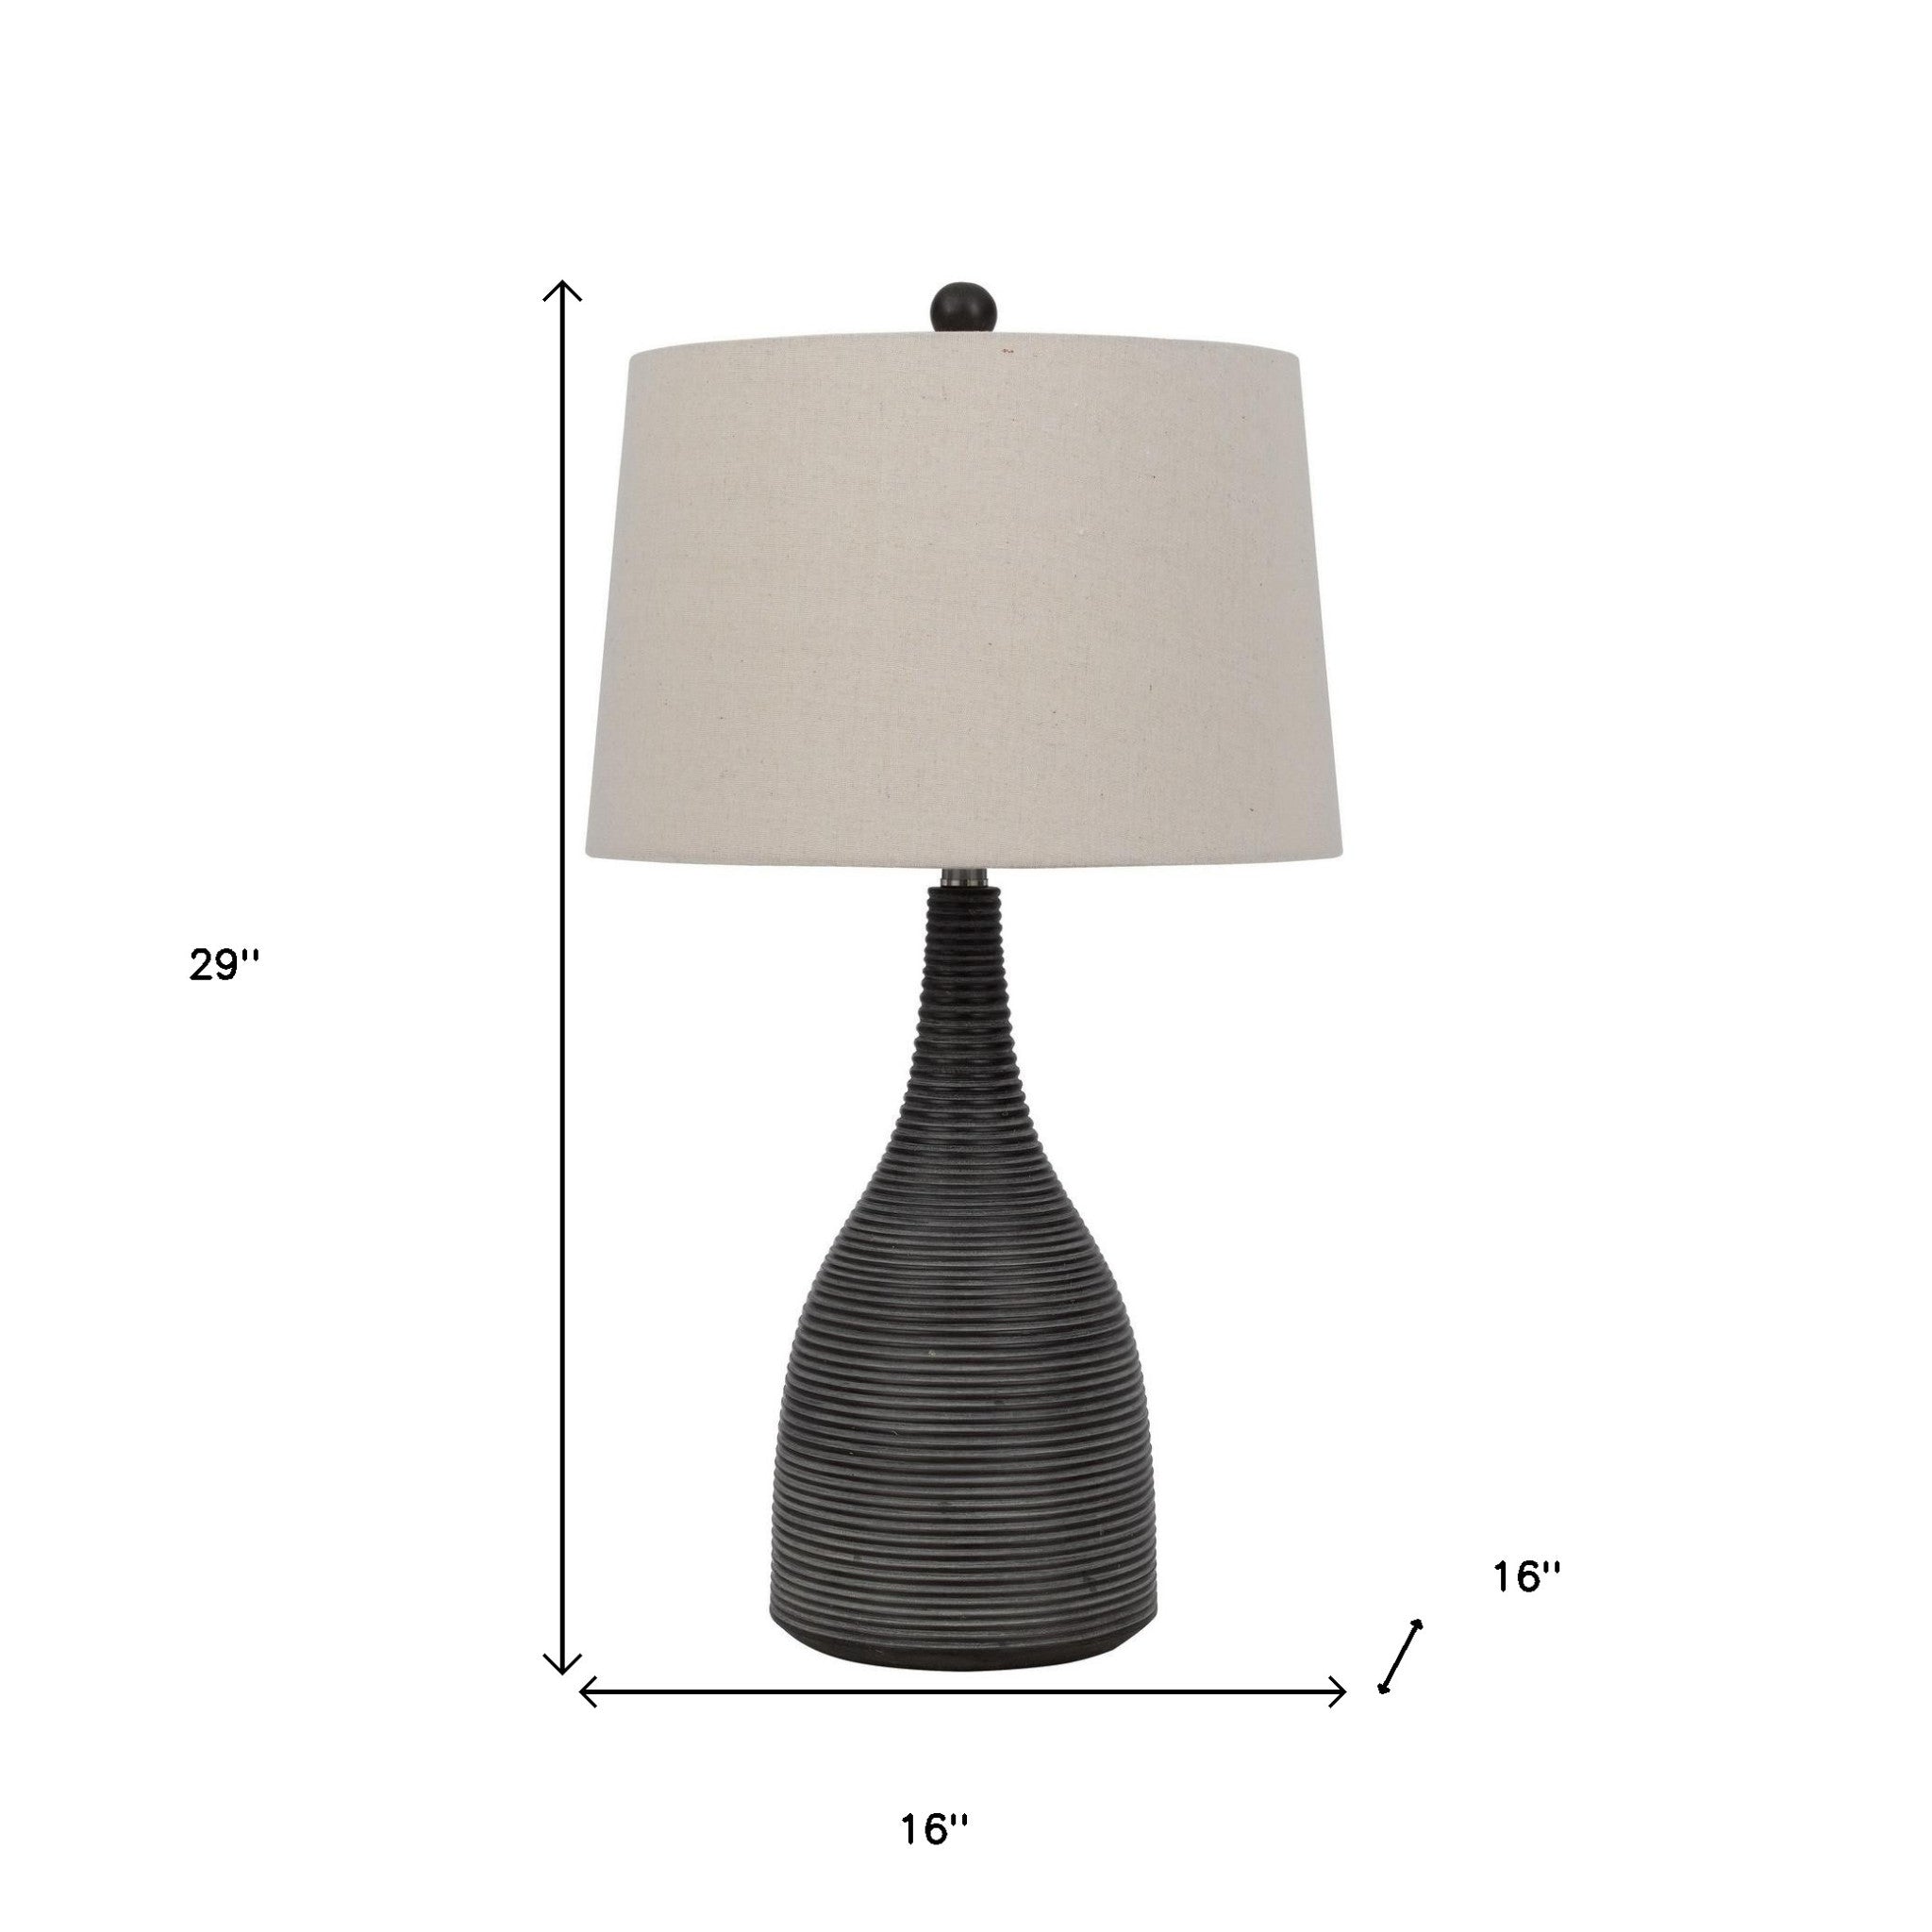 29" Black Ceramic Table Lamp With Beige Empire Shade